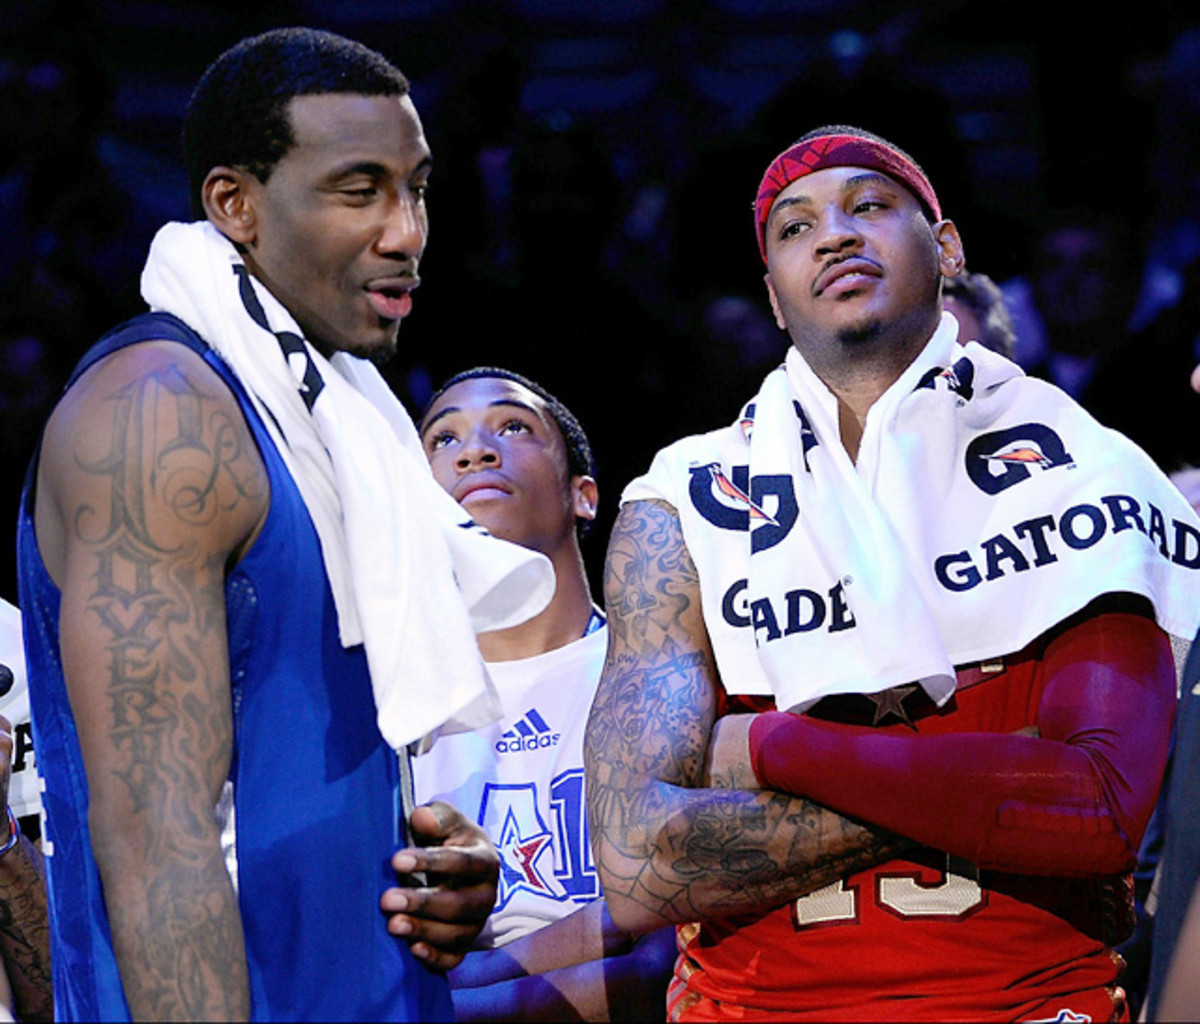  Amar'e Stoudemire and Carmelo Anthony